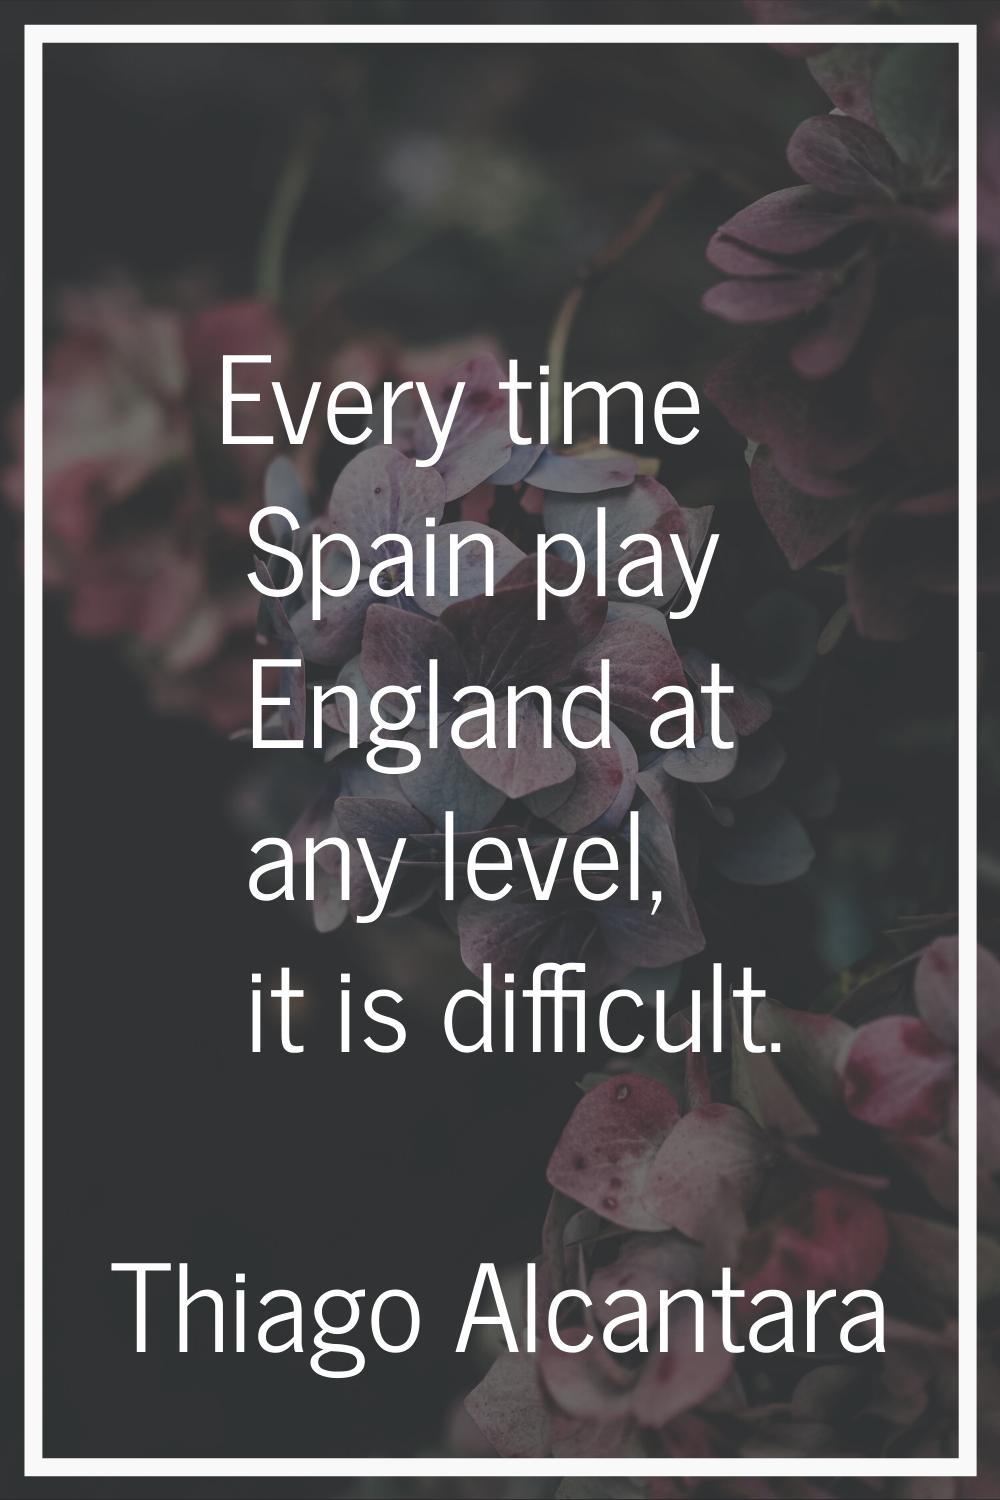 Every time Spain play England at any level, it is difficult.